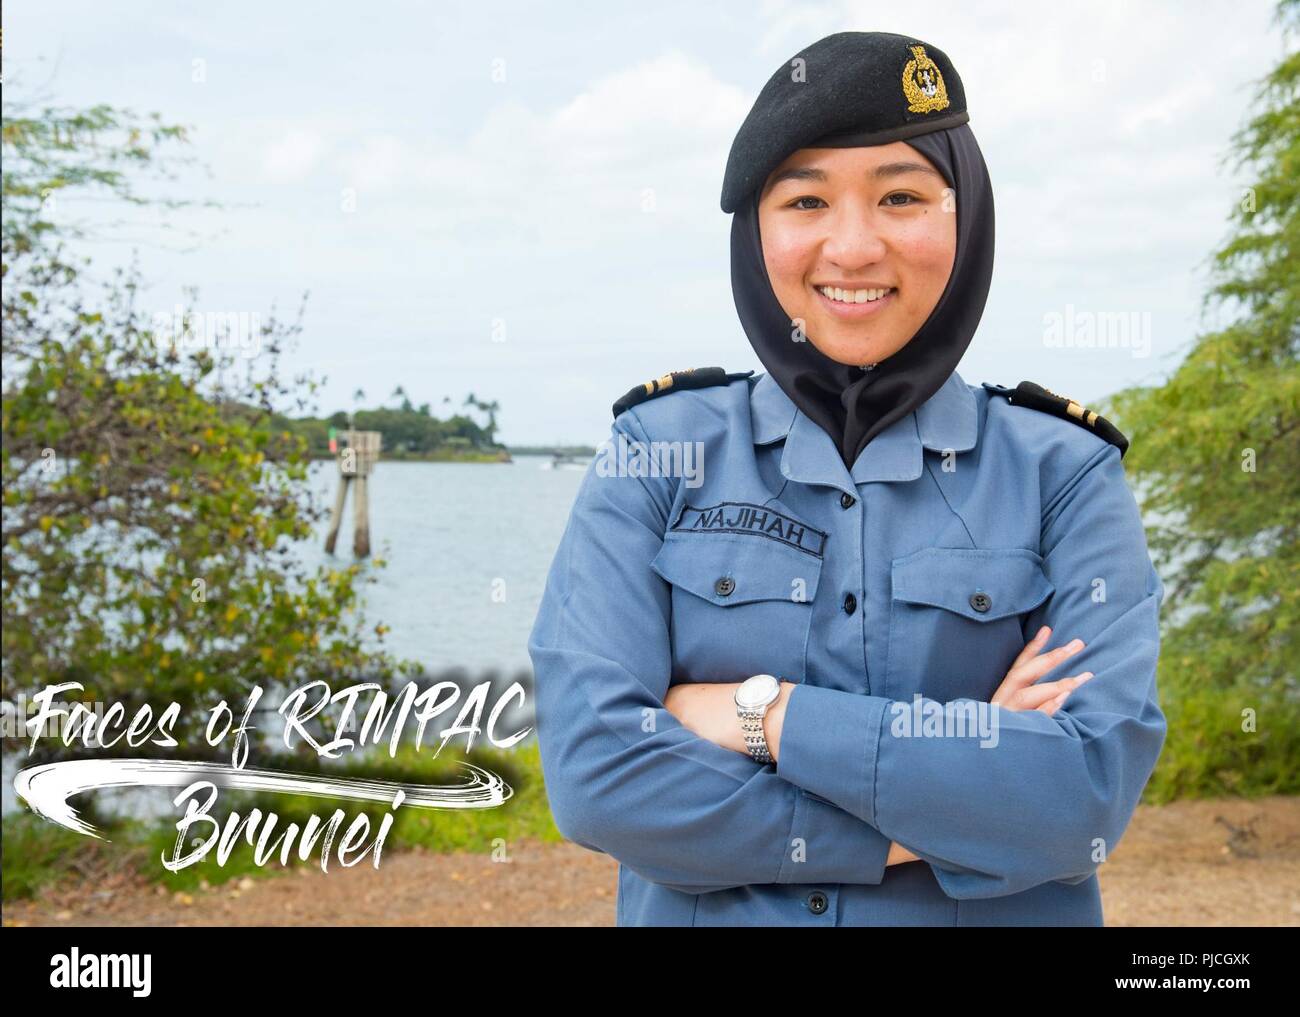 JOINT BASE PEARL HARBOR-HICKAM (July 17, 2018) Royal Brunei Navy Lt.jg. Najihah Hisab, from Darussalam, Brunei pauses for a portrait as part of a Rim of the Pacific (RIMPAC) campaign intended to highlight the diversity of participating nations called Faces of RIMPAC. Twenty-five nations, 46 ships, five submarines, about 200 aircraft and 25,000 personnel are participating in RIMPAC from June 27 to Aug. 2 in and around the Hawaiian Islands and Southern California. The world’s largest international maritime exercise, RIMPAC provides a unique training opportunity while fostering and sustaining coo Stock Photo